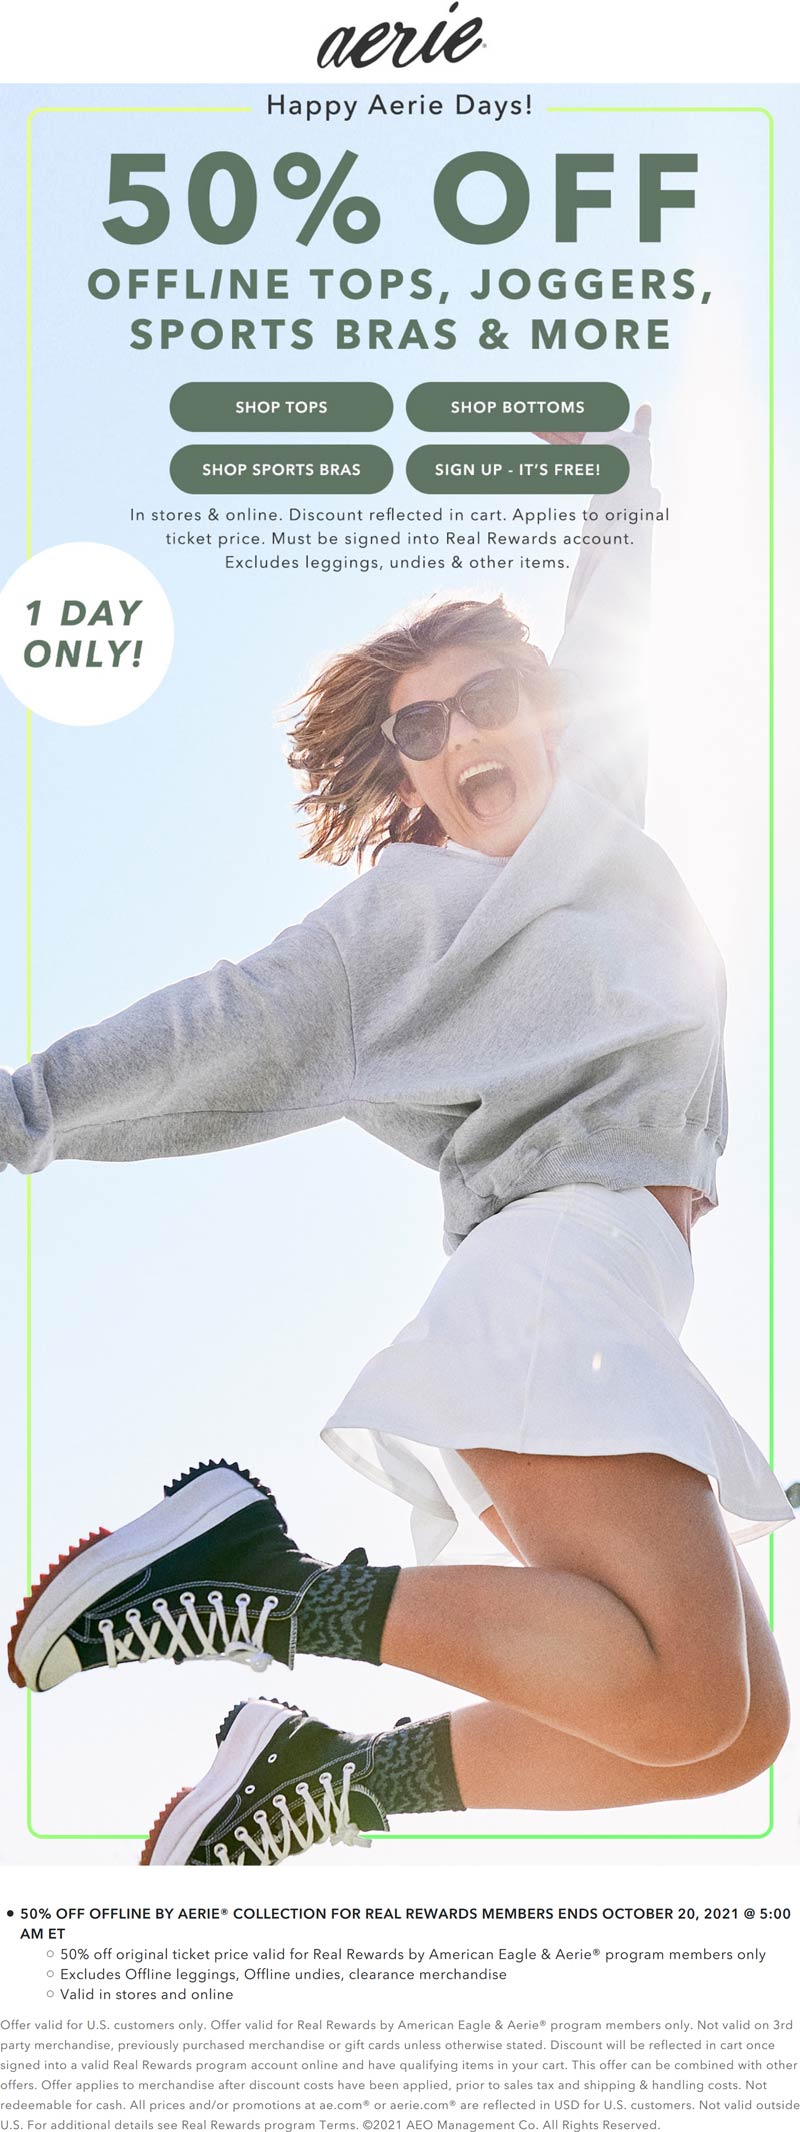 Aerie stores Coupon  50% off Offline collection today at Aerie, ditto online #aerie 